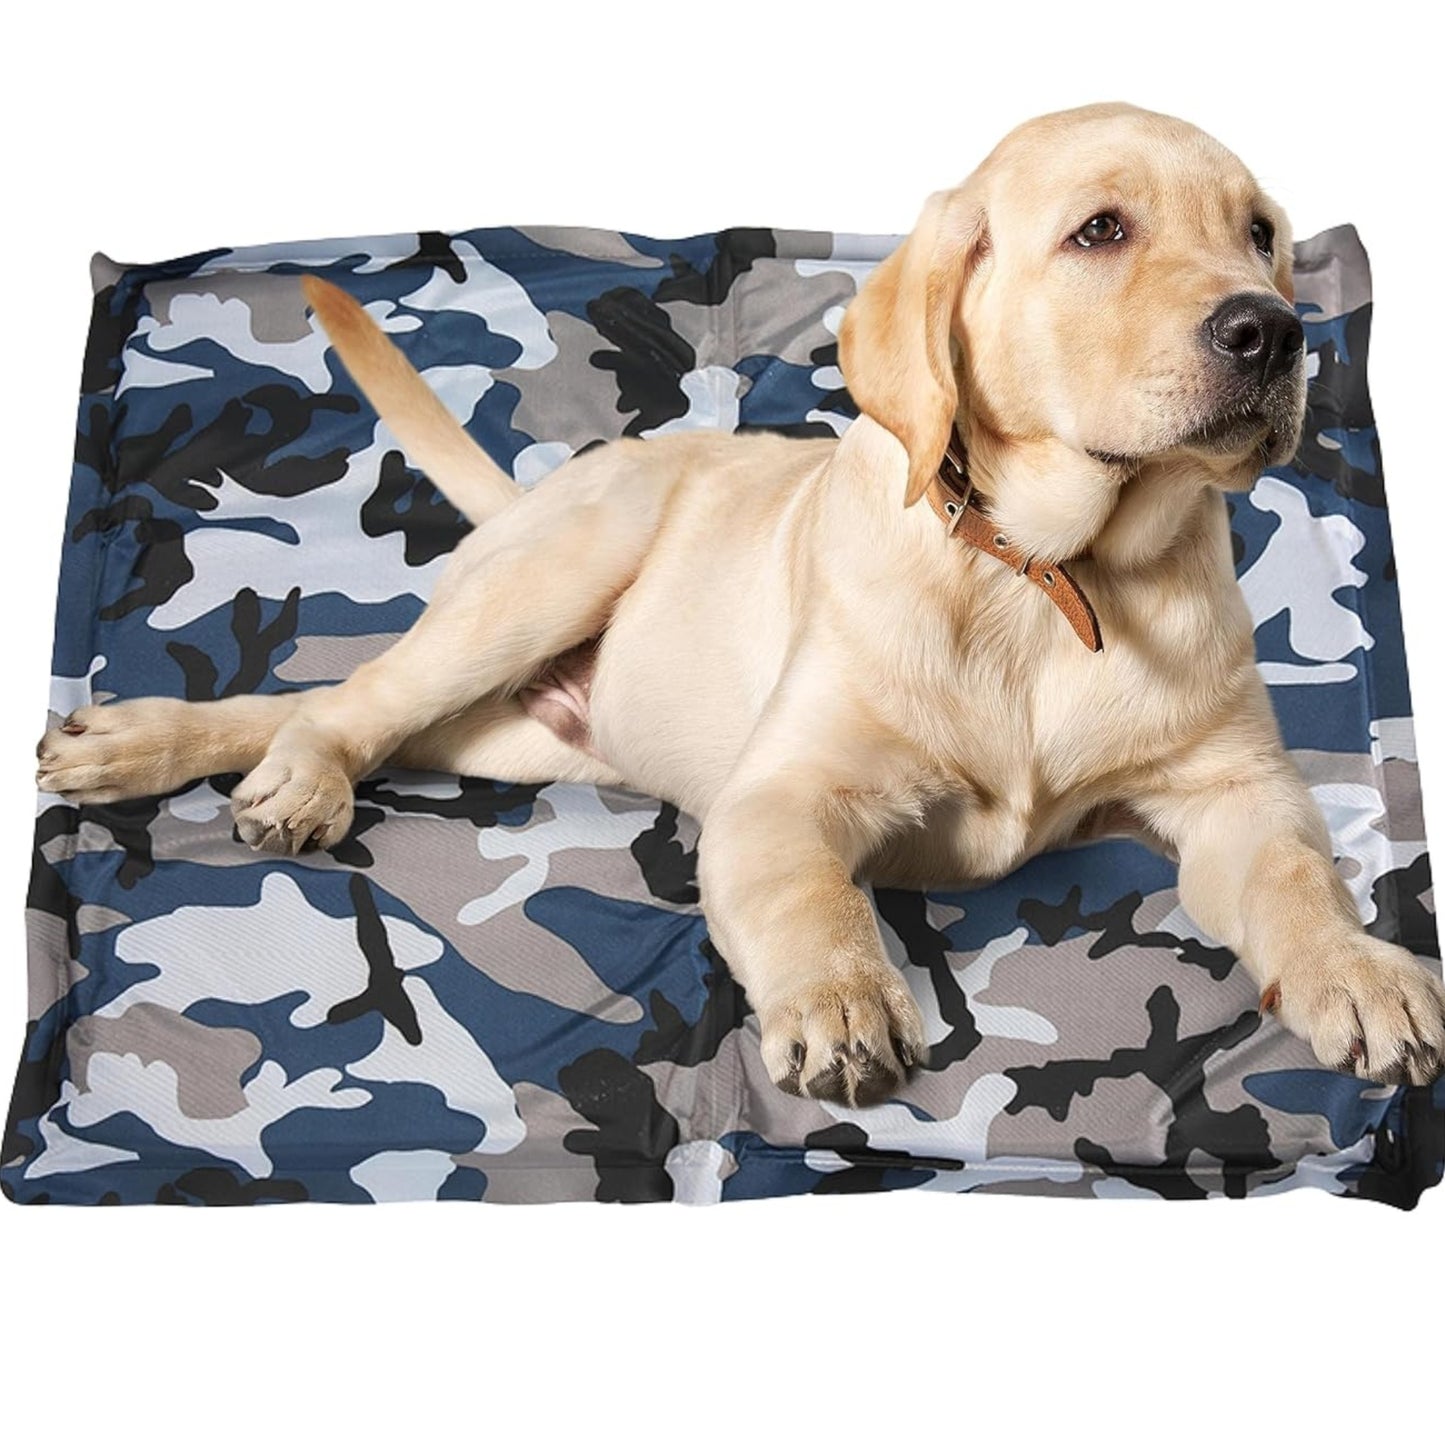 Foodie Puppies Heat Relief Pressure Activated Comfort Soft Cooling Mat